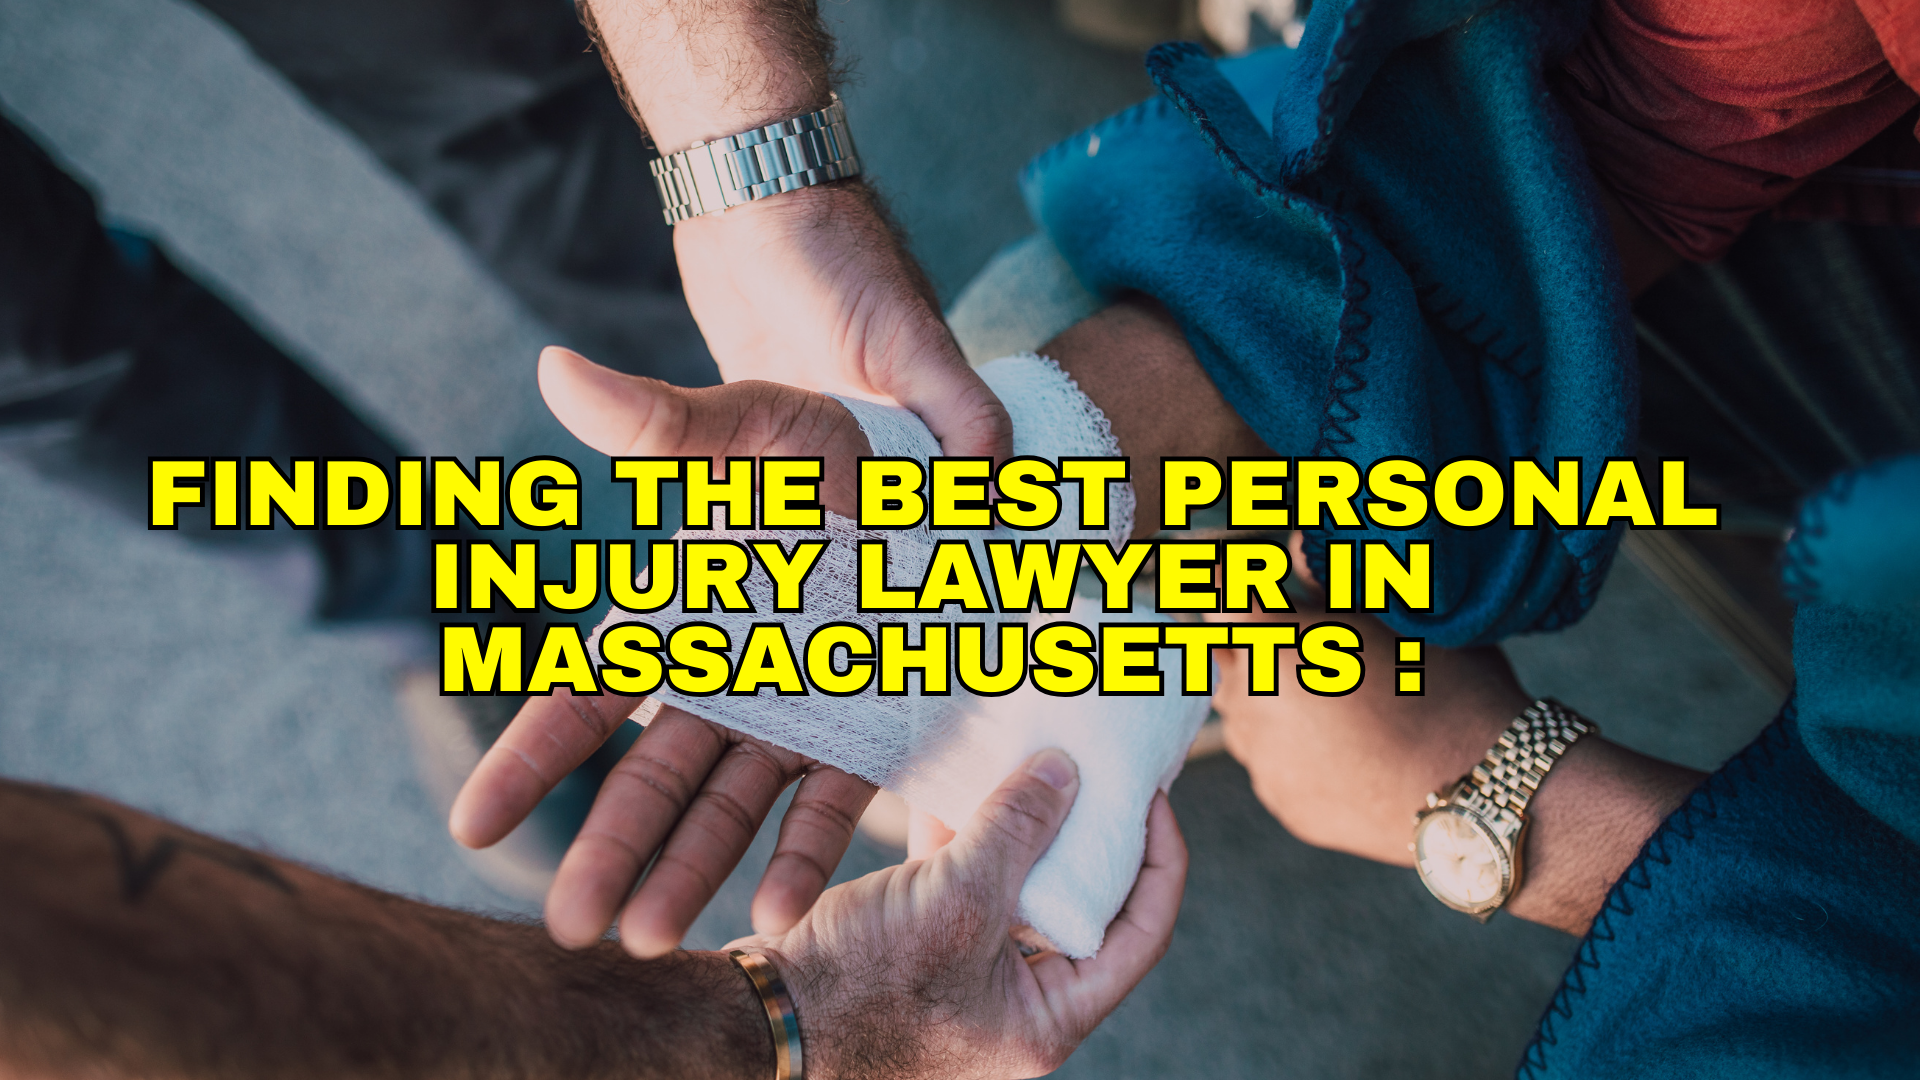 Finding the Best Personal Injury Lawyer in Massachusetts :